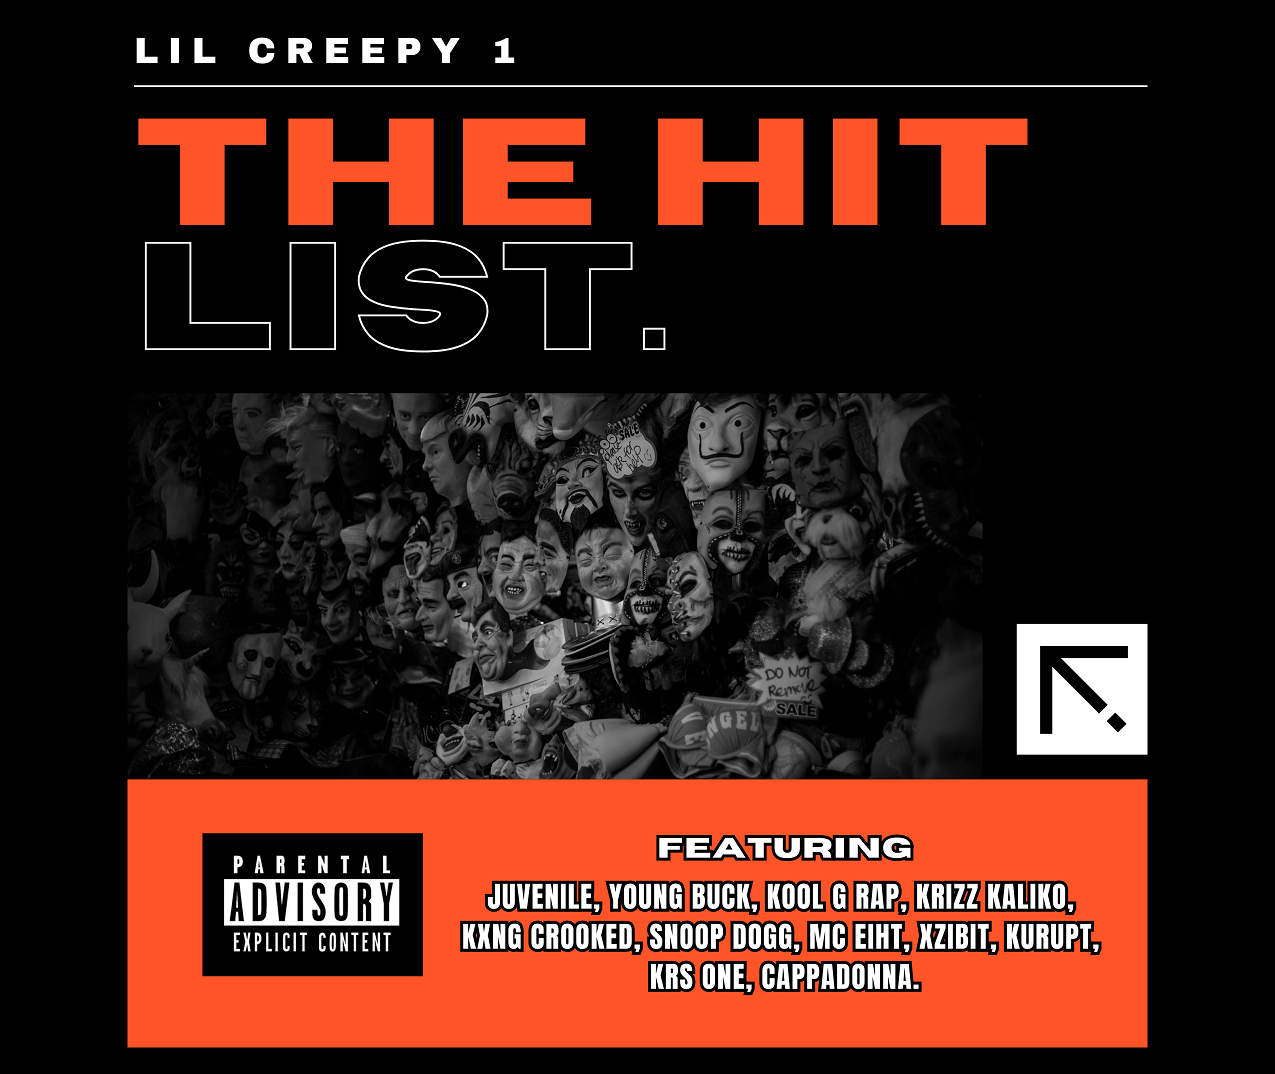 Lil Creepy – songs from the The Hit List